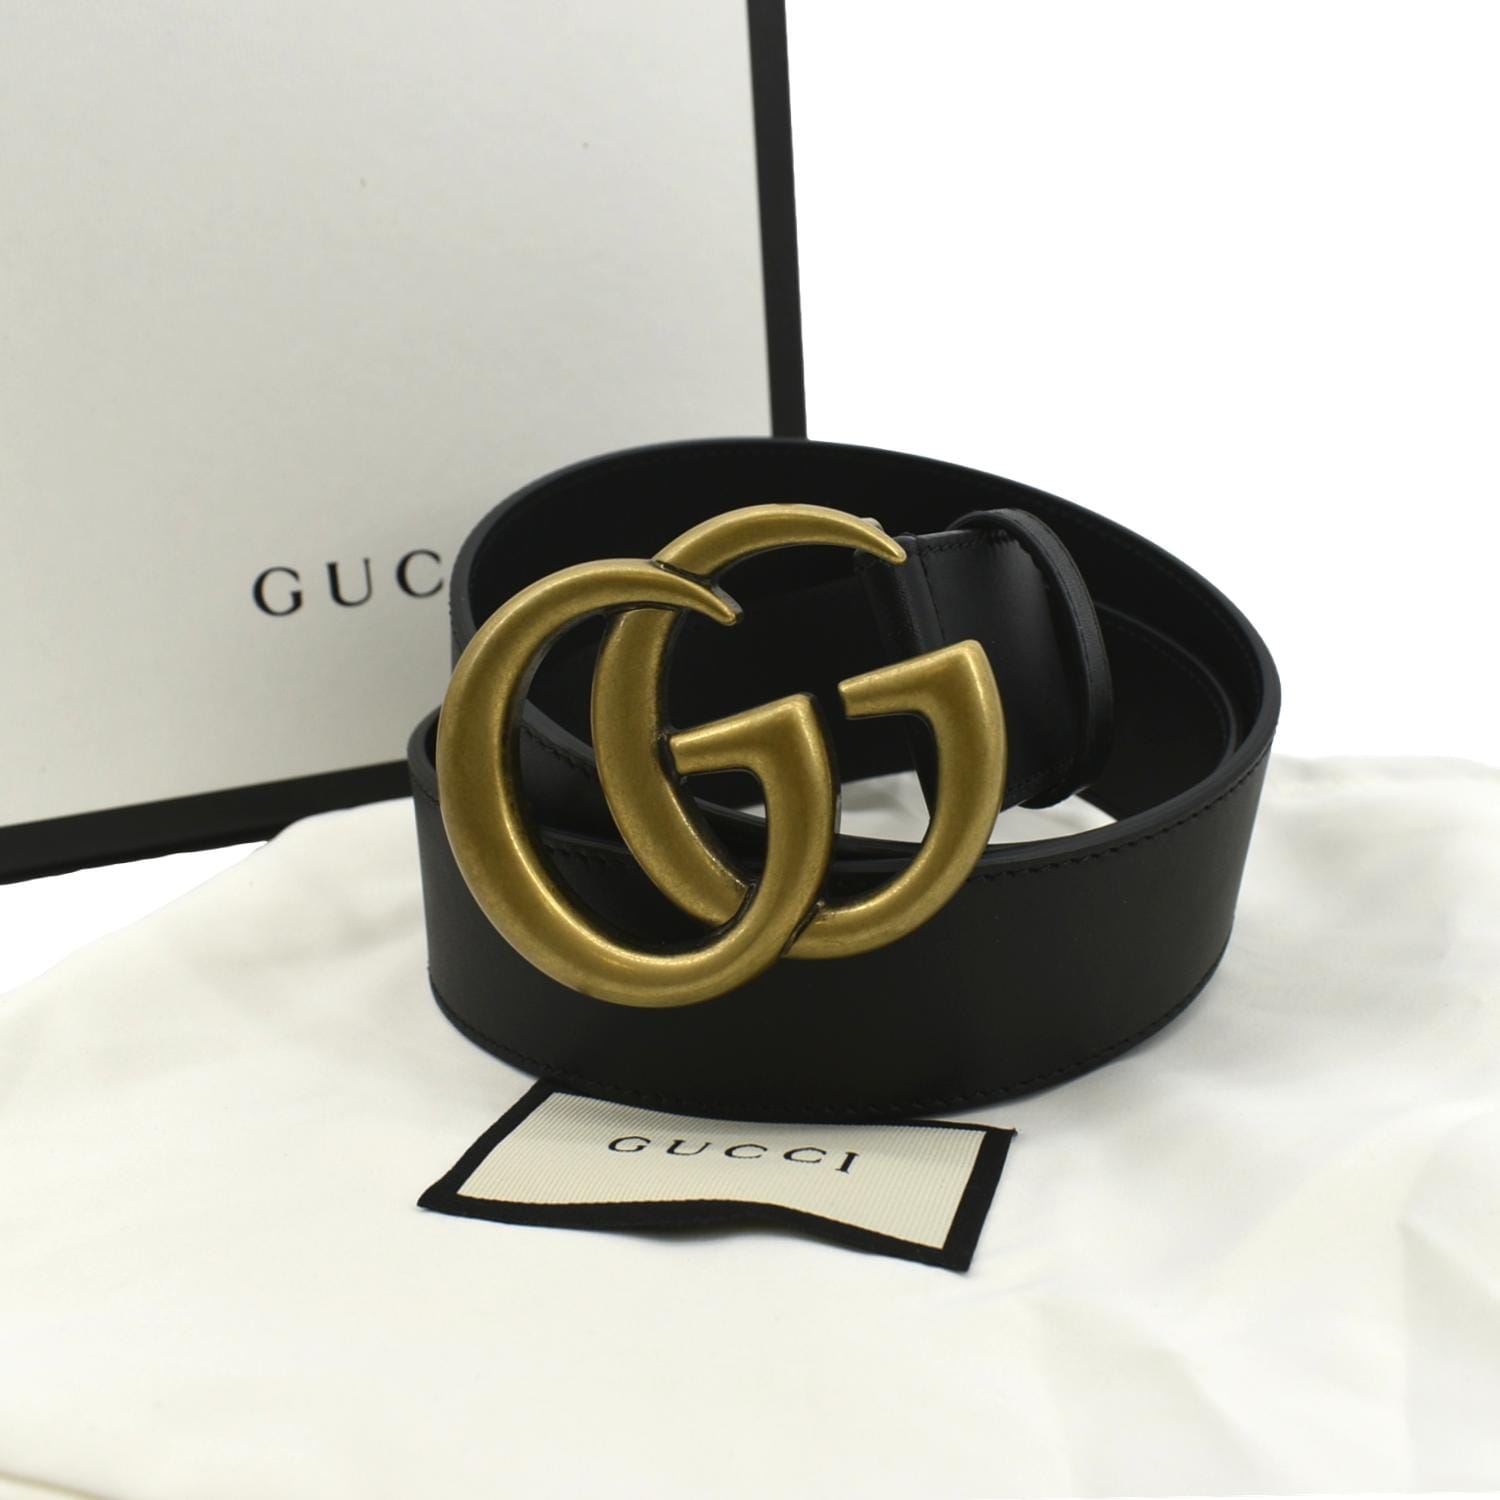 Gg buckle leather belt Gucci Black size 80 cm in Leather - 31779815